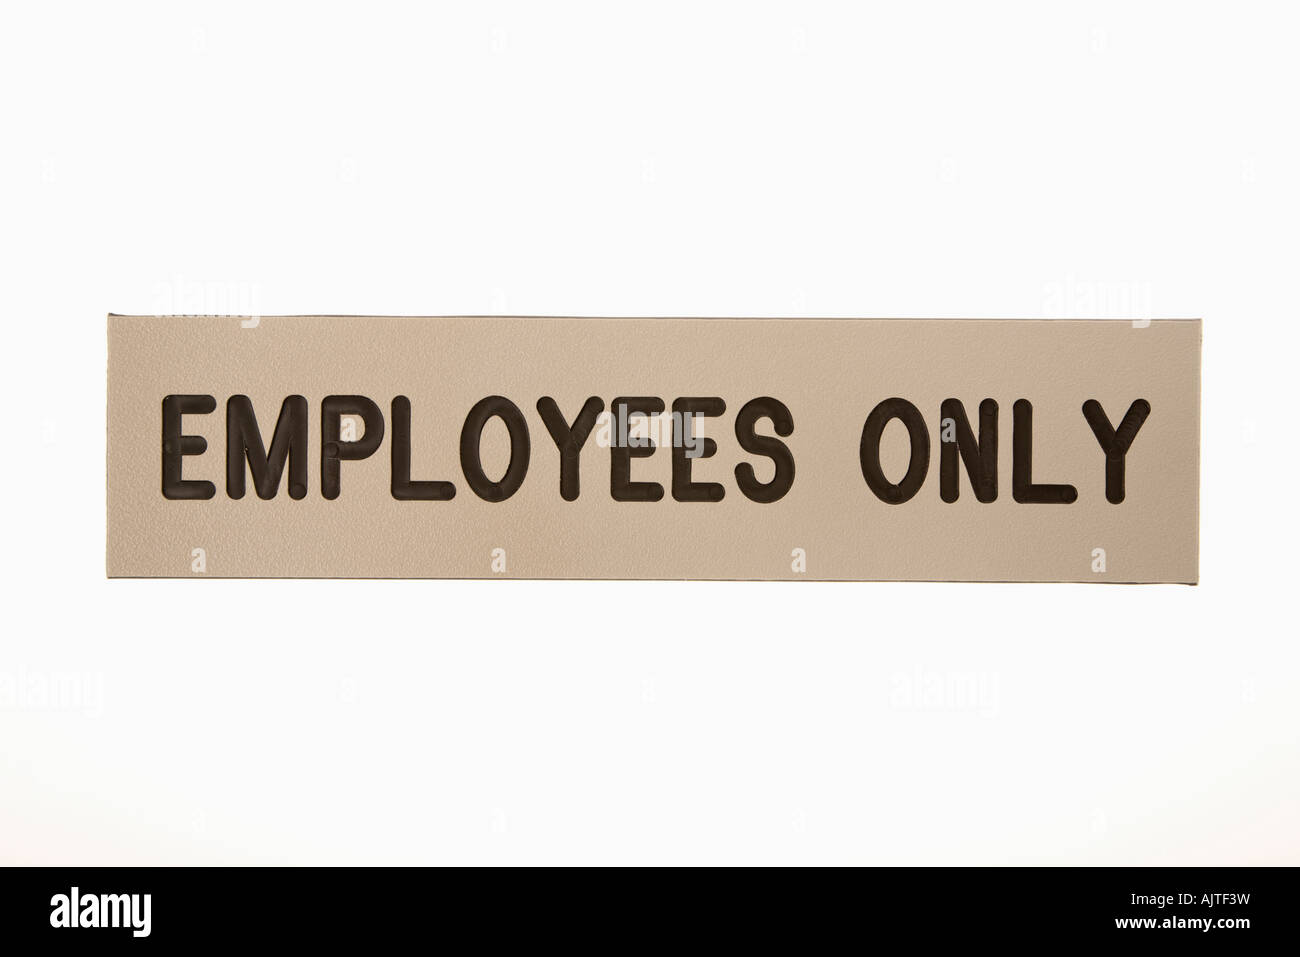 Employees only sign against white background Stock Photo